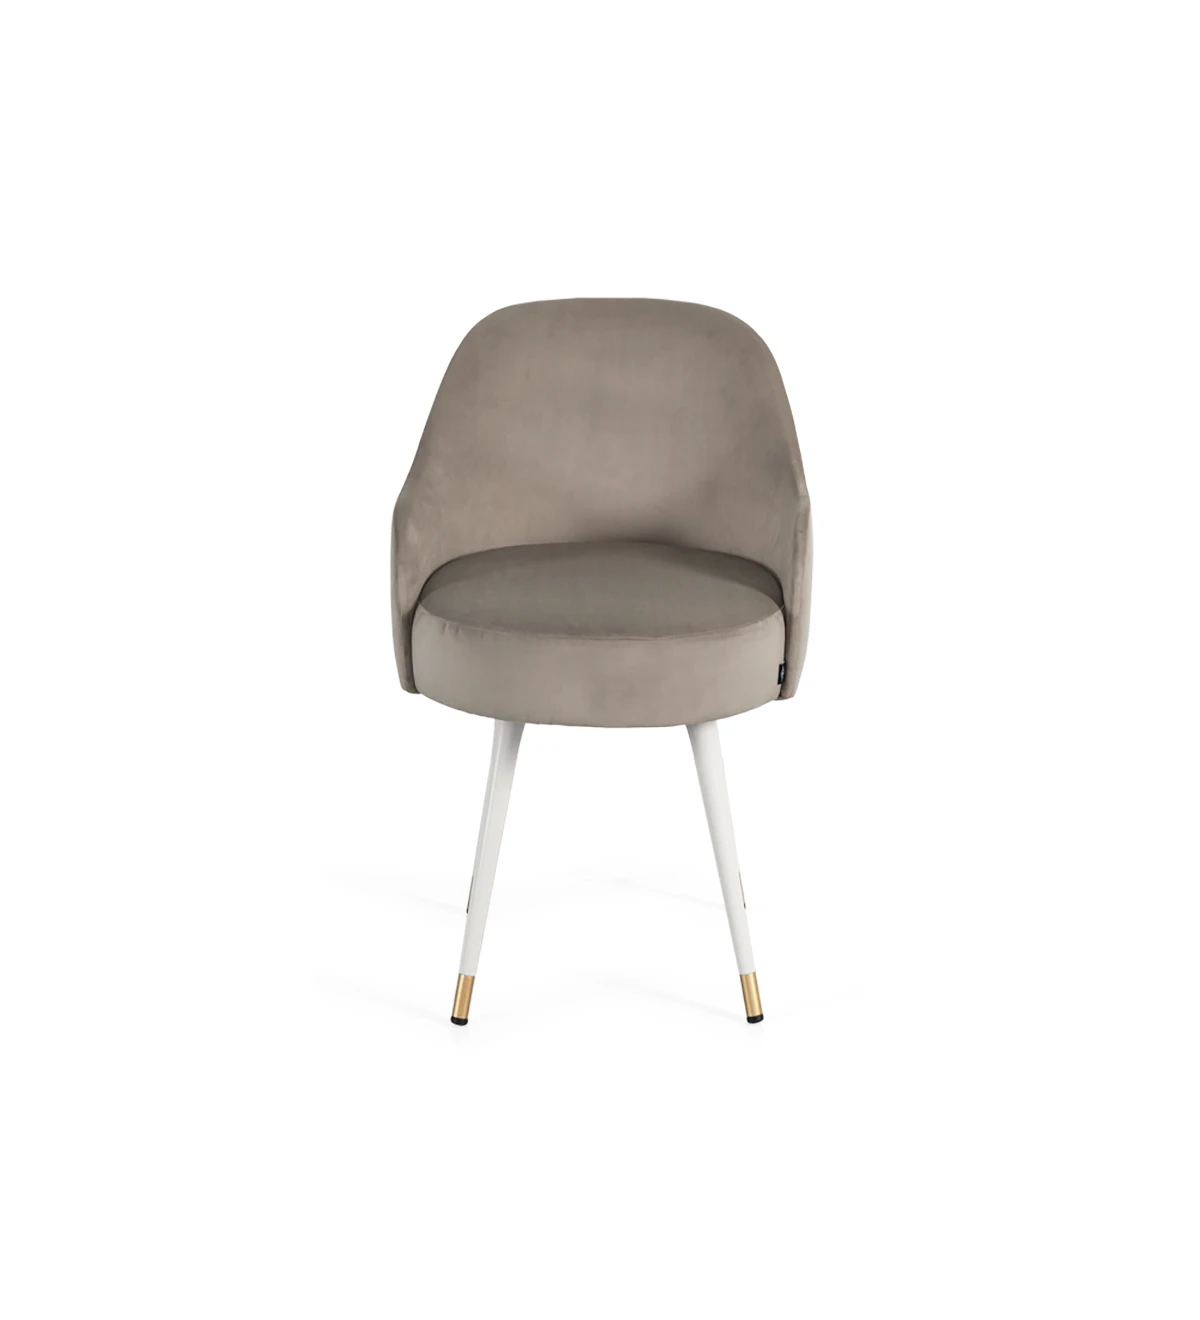 Fabric upholstered swivel chair with pearl lacquered feet and gold detailing.